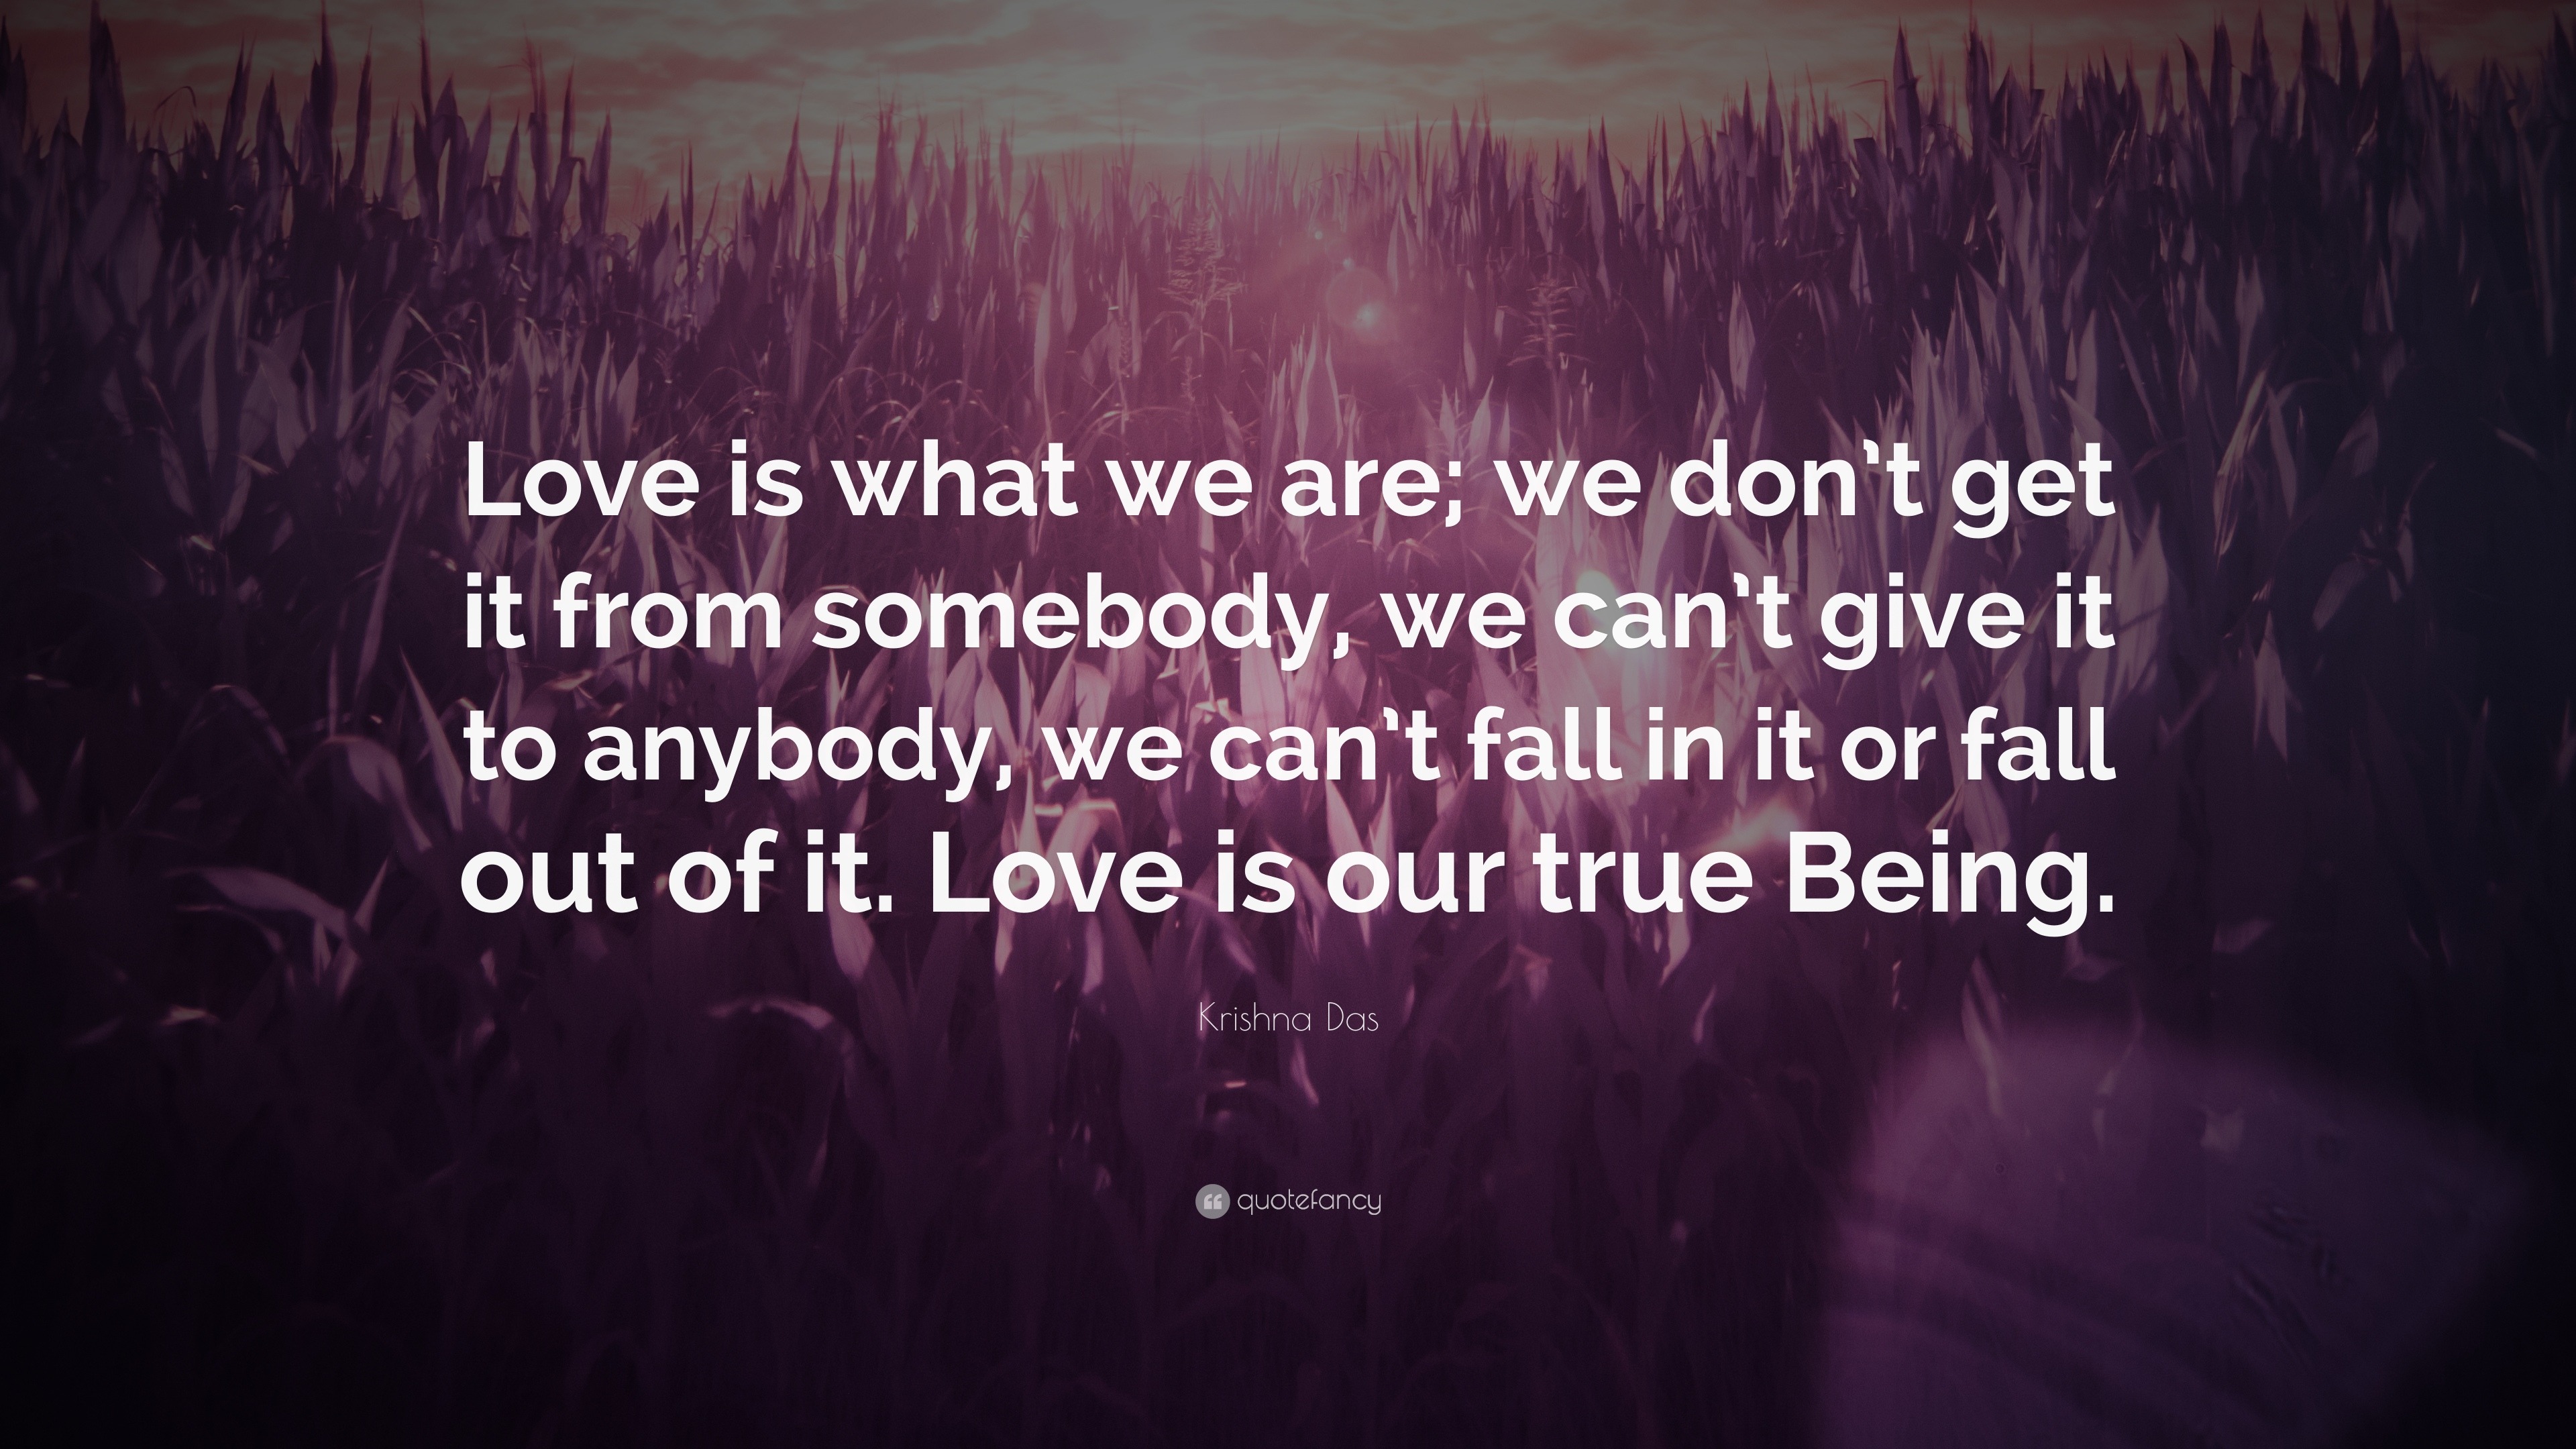 Krishna Das Quote Love Is What We Are We Dont Get